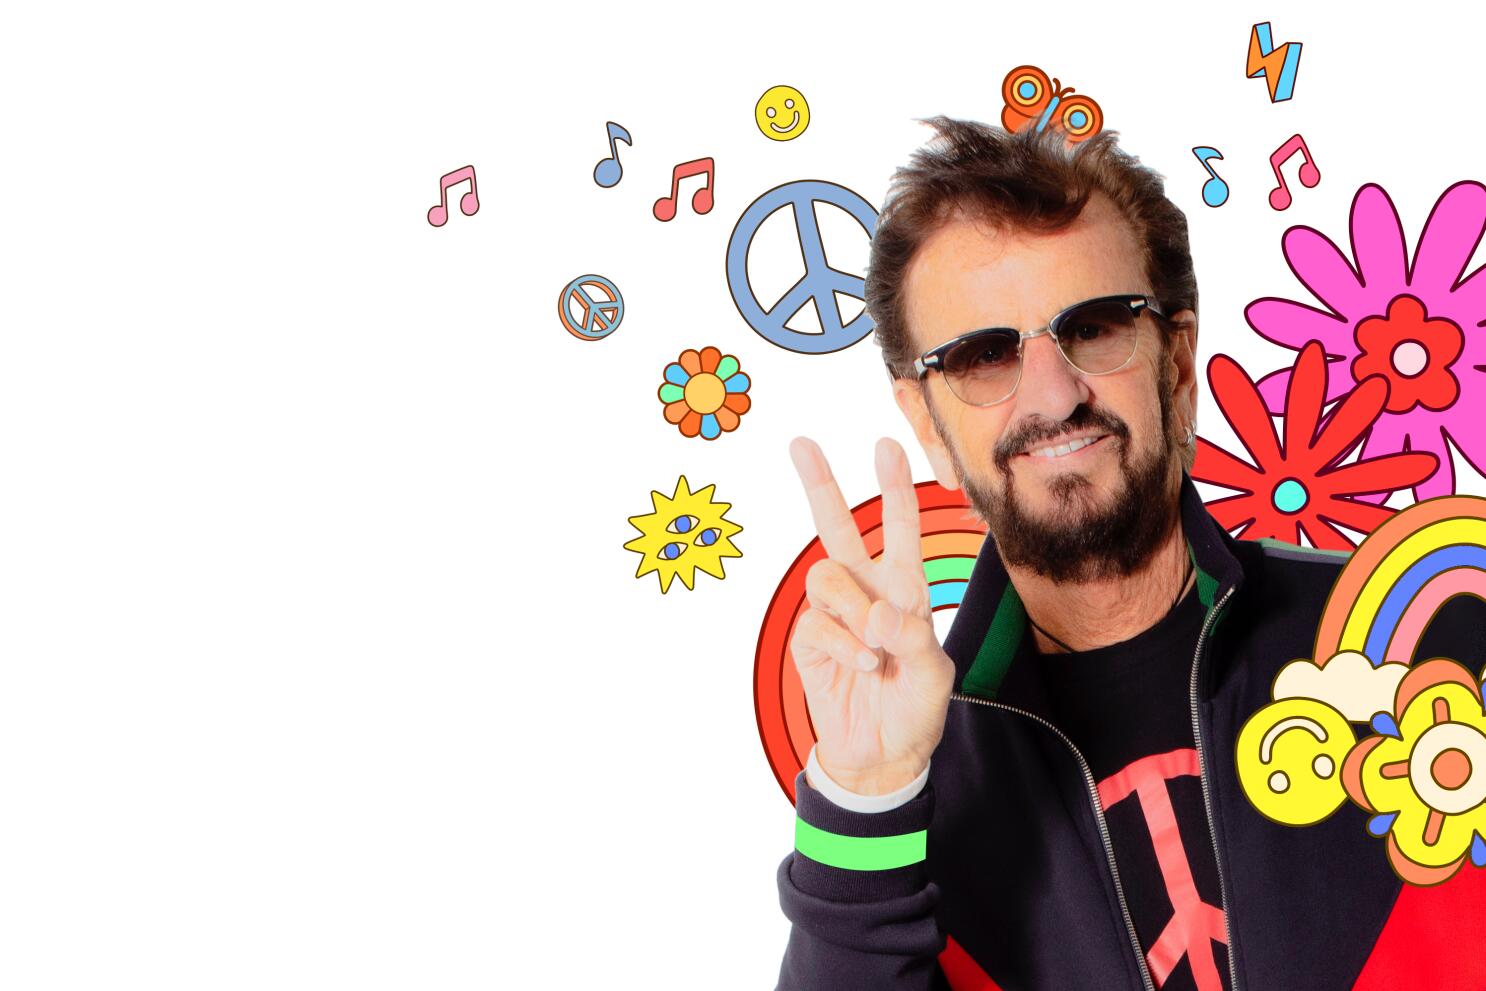 Ringo Starr Covered 1 of the Songs He Bought as a Kid After The